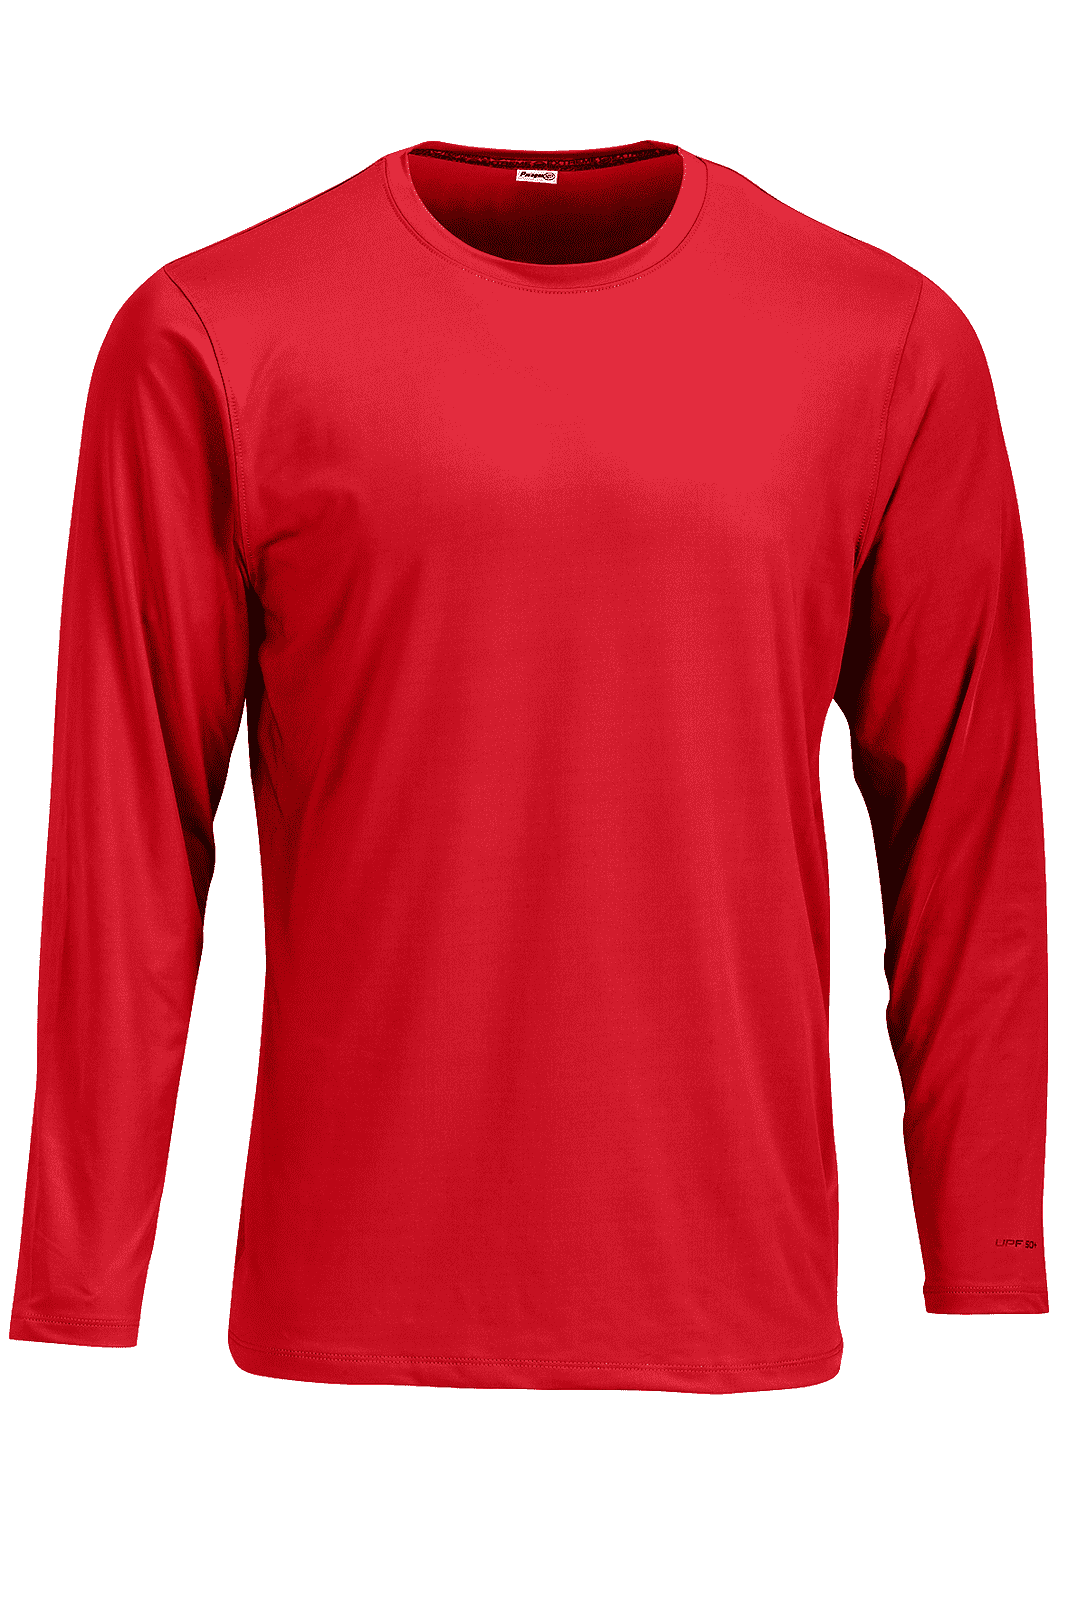 Paragon 222 Aruba Adult Long Sleeve Tee - Red - HIT a Double